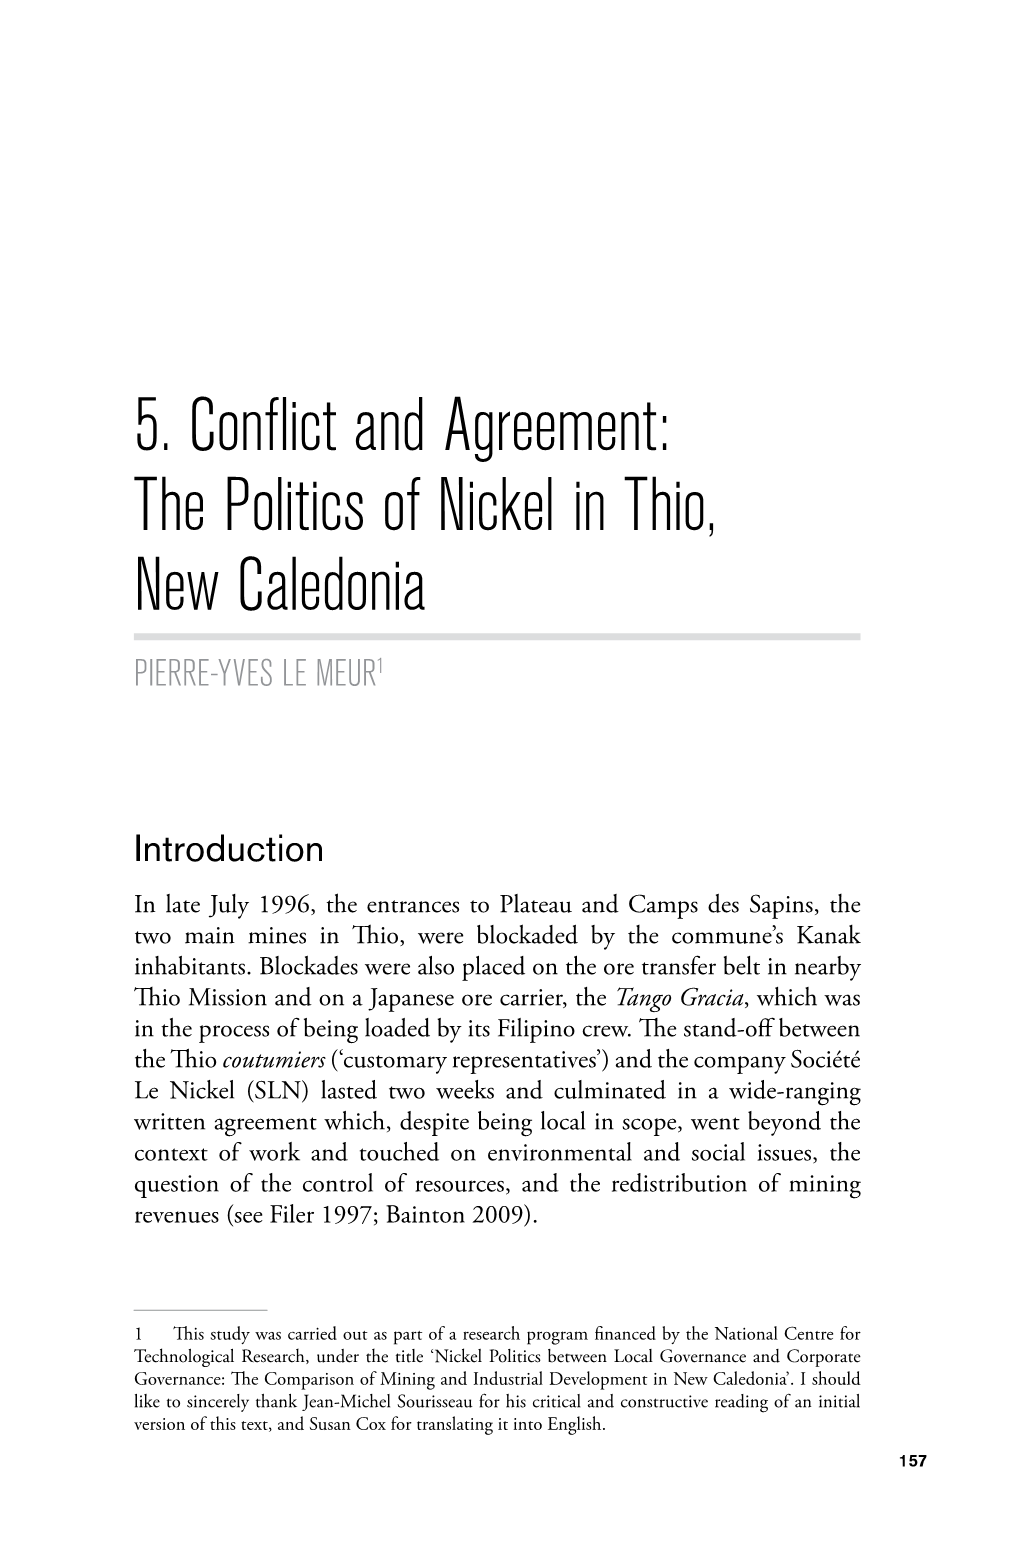 The Politics of Nickel in Thio, New Caledonia PIERRE-YVES LE MEUR1